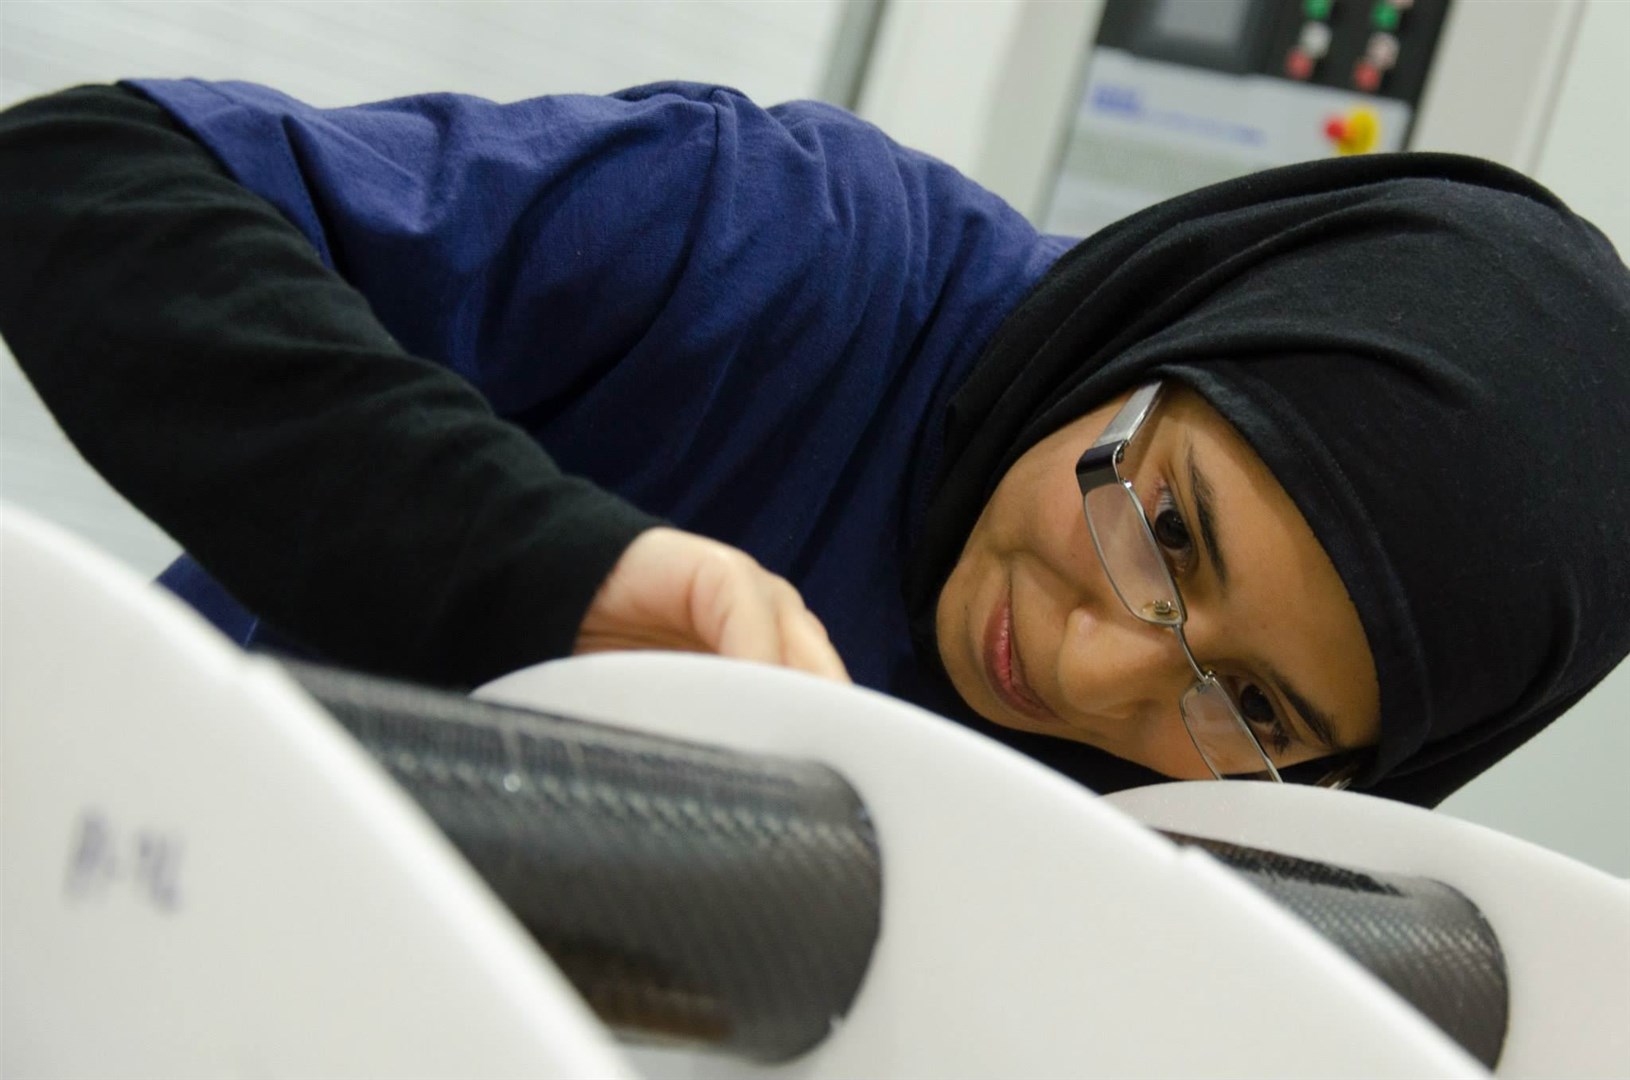 Systems engineer for Leonardo Hania Mohiuddin, who is based at RAF Lossiemouth.